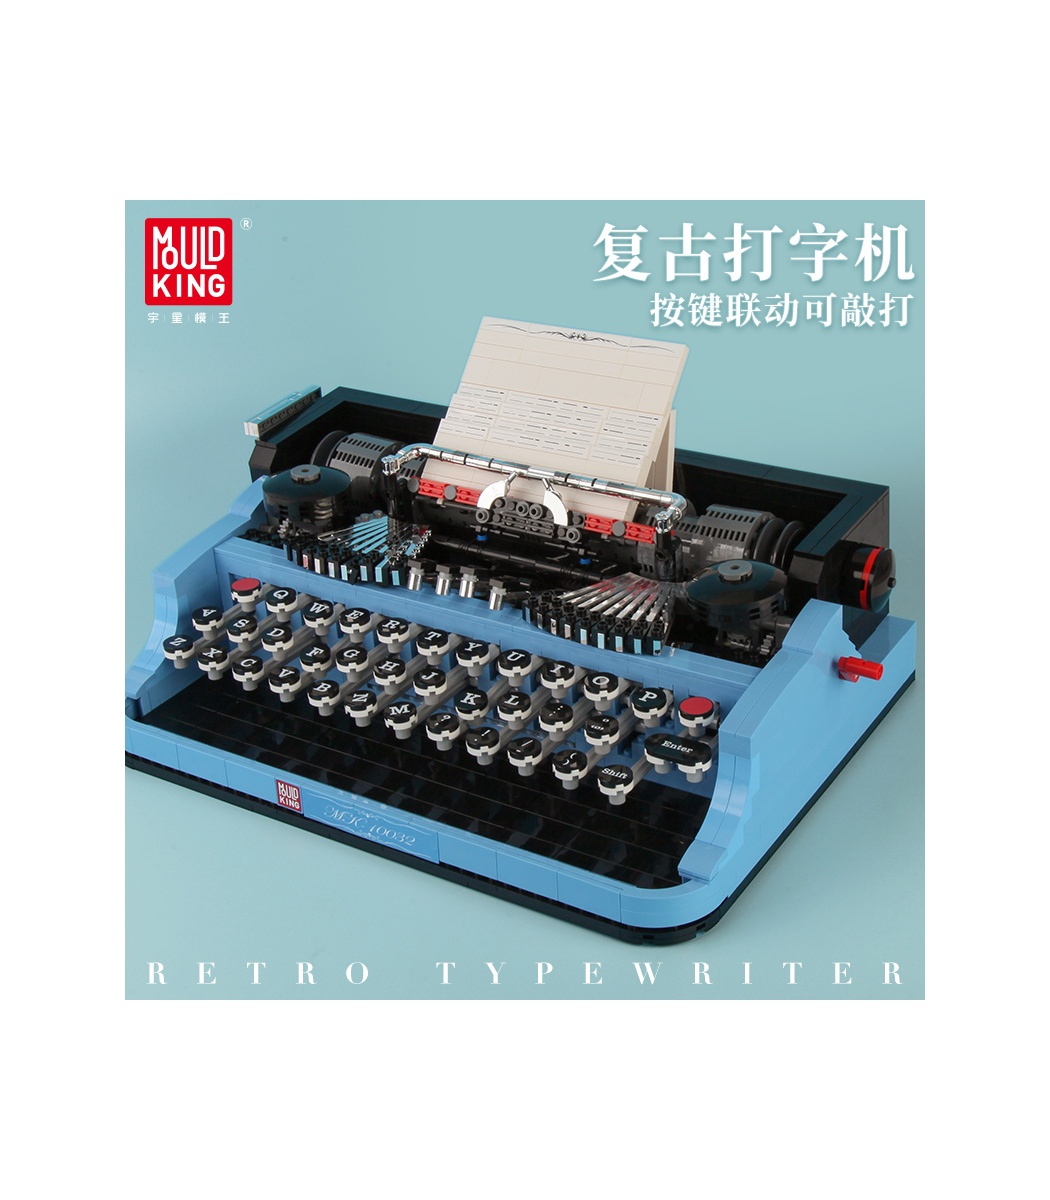 MOULD KING 10032 The Classic Typewriter Model Assembly Building